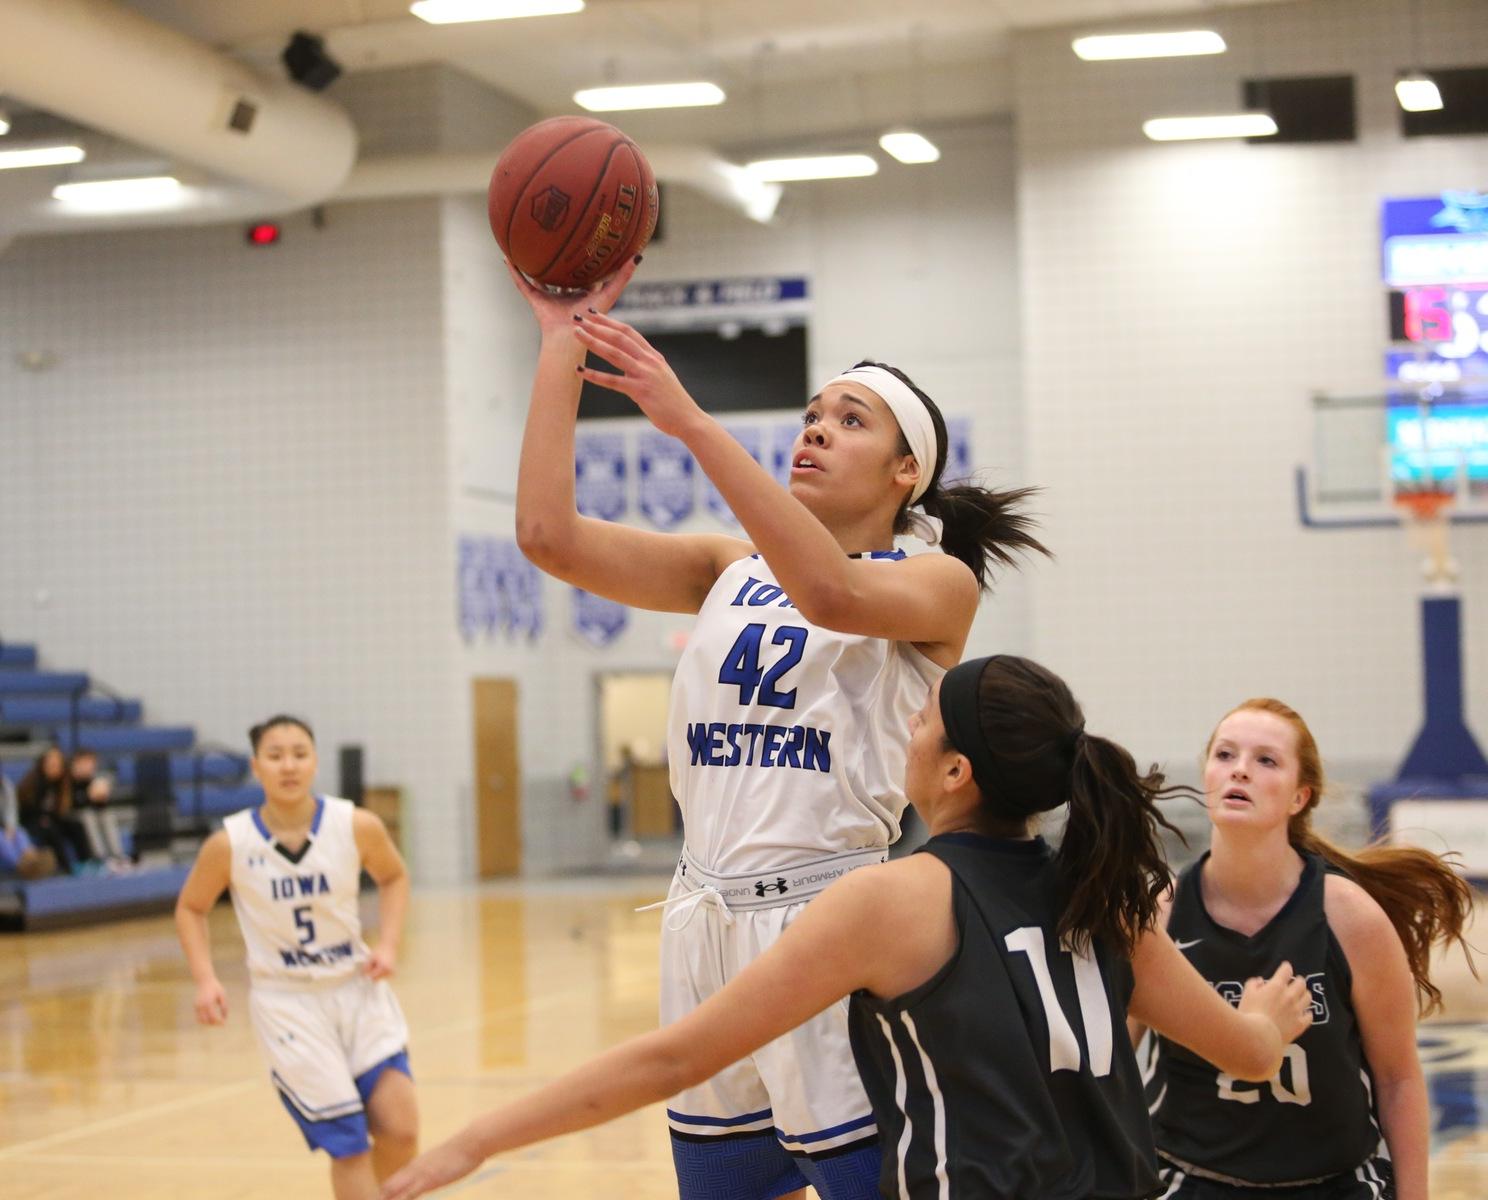 Kiara Dallmann tallied 11 points in the win over Marshalltown this past Wednesday for the Reivers 13th straight-win.